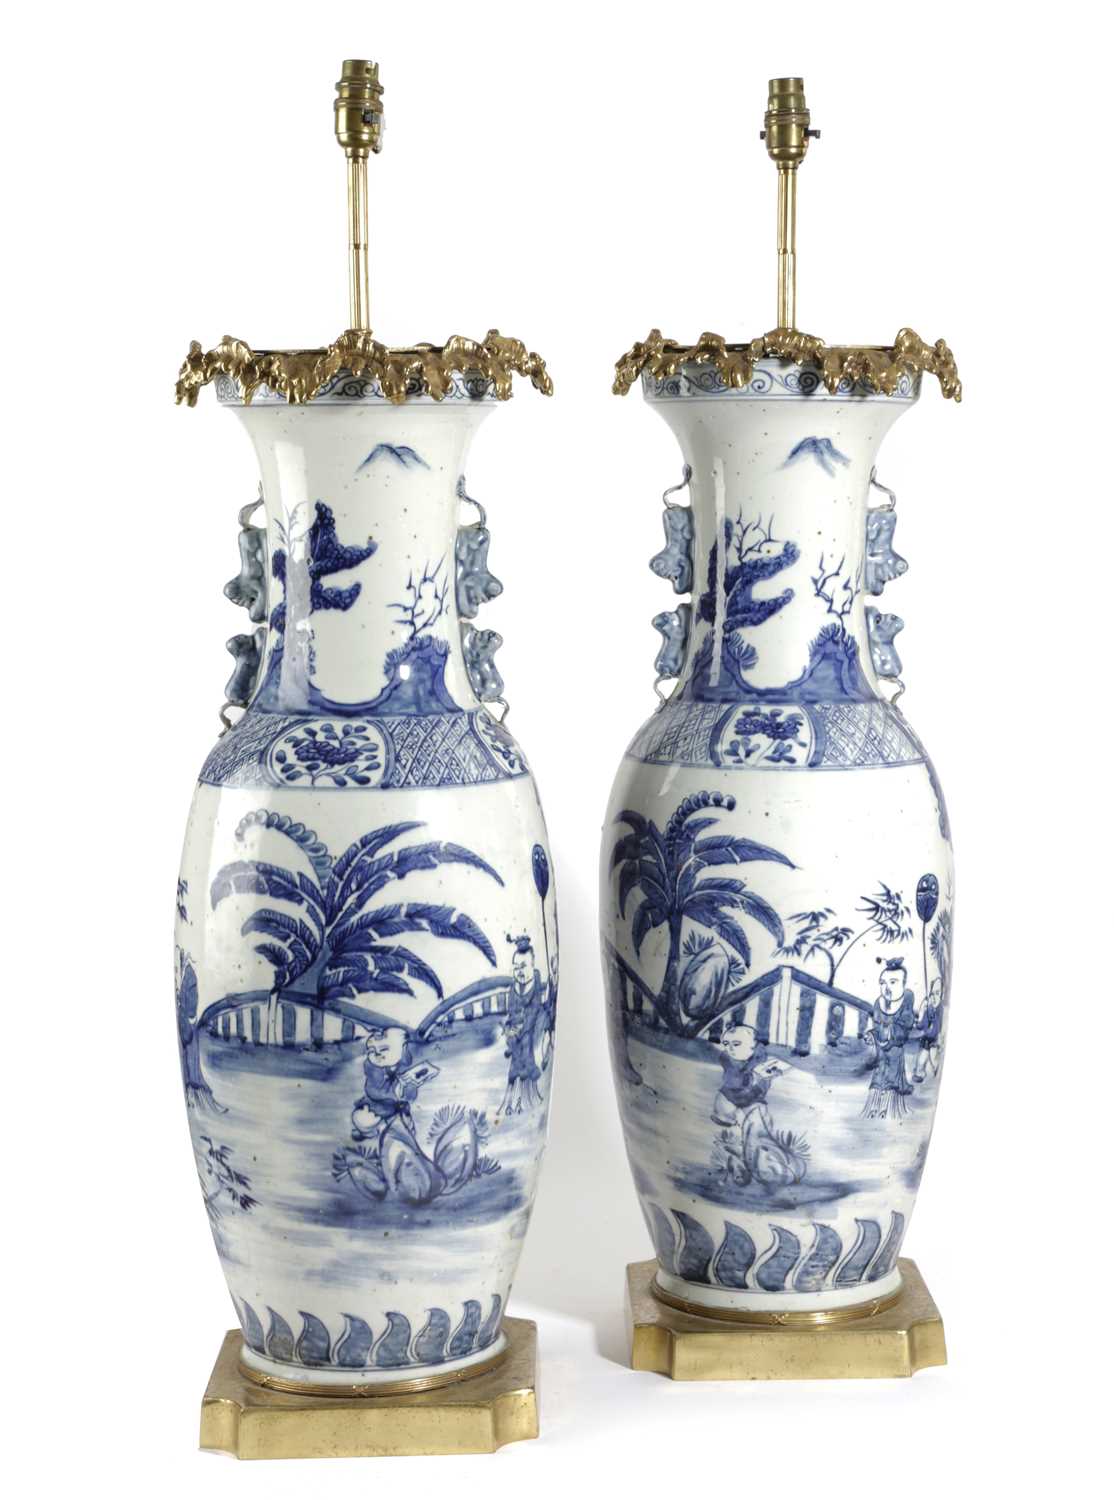 A PAIR OF CHINESE BLUE AND WHITE VASE TABLE LAMPS LATE 19TH / EARLY 20TH CENTURY the body with